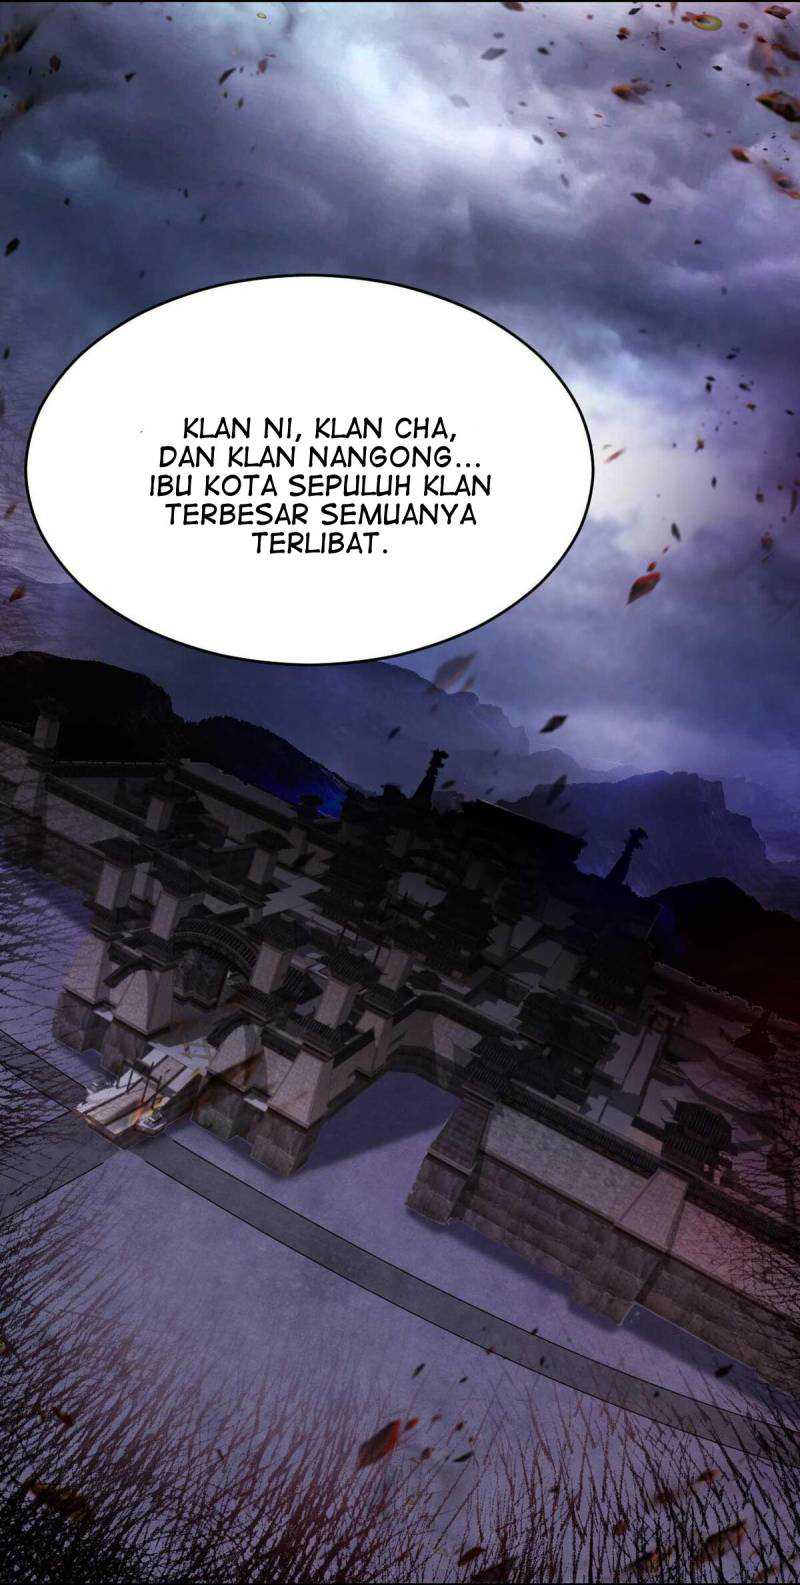 Rise of The Demon King Chapter 108